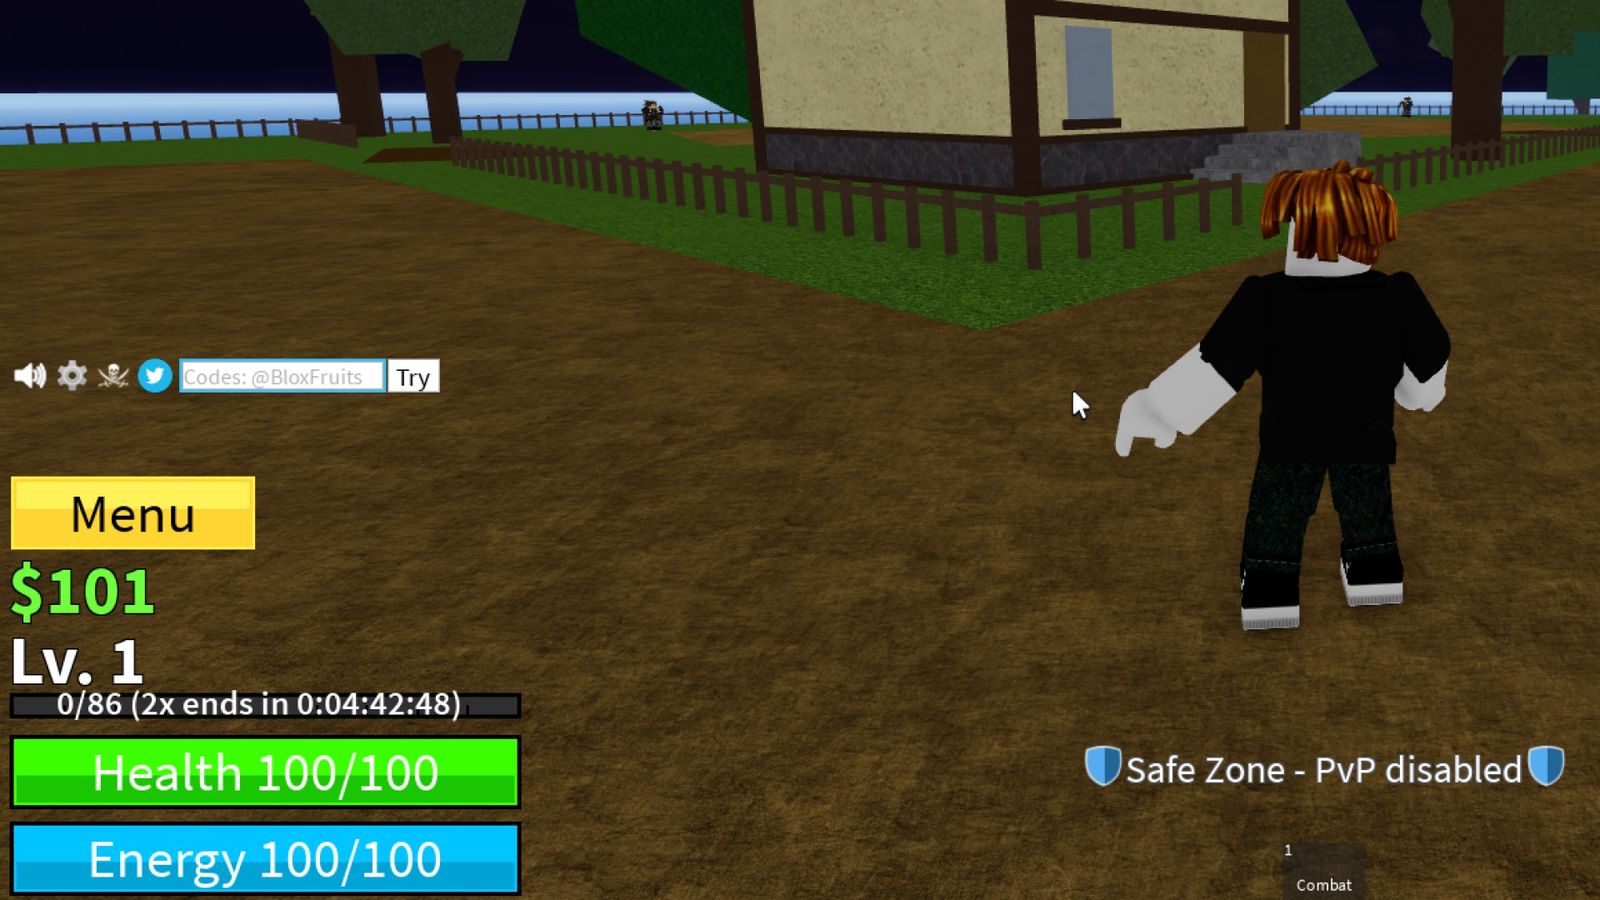 An in-game screenshot of Blox Fruits code redemption section and menu